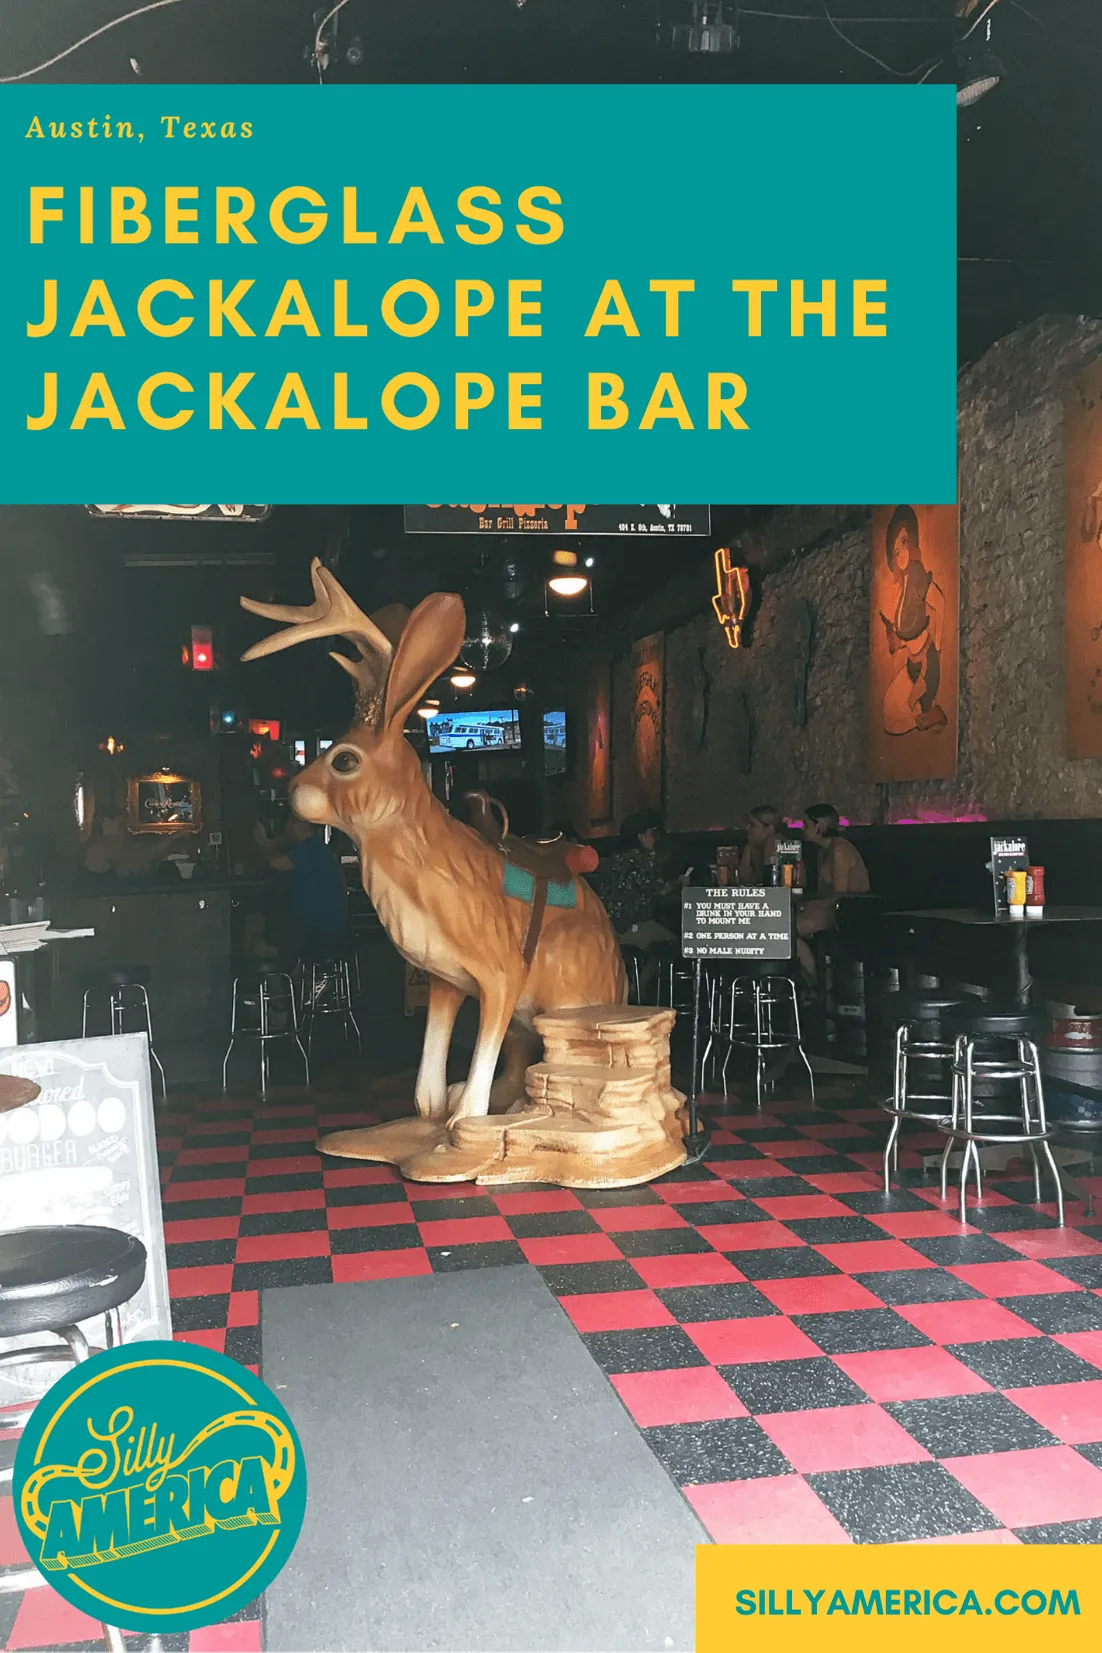 The Jackalope Bar is a popular dive bar in Austin, Texas named for my favorite animal. And what would a bar with a name like that be without a giant fiberglass jackalope inside! Find this roadside attraction on your road trip or vacation. #TexasRoadsideAttractions #TexasRoadsideAttraction #RoadsideAttractions #RoadsideAttraction #RoadTrip #TexasRoadTrip #TexasRoadTripBucketLists #TexasBucketList #TexasRoadTripIdeas #TexasWeekendGetaways #TexasRoadTripItinerary #AustinTexas #Jackalope